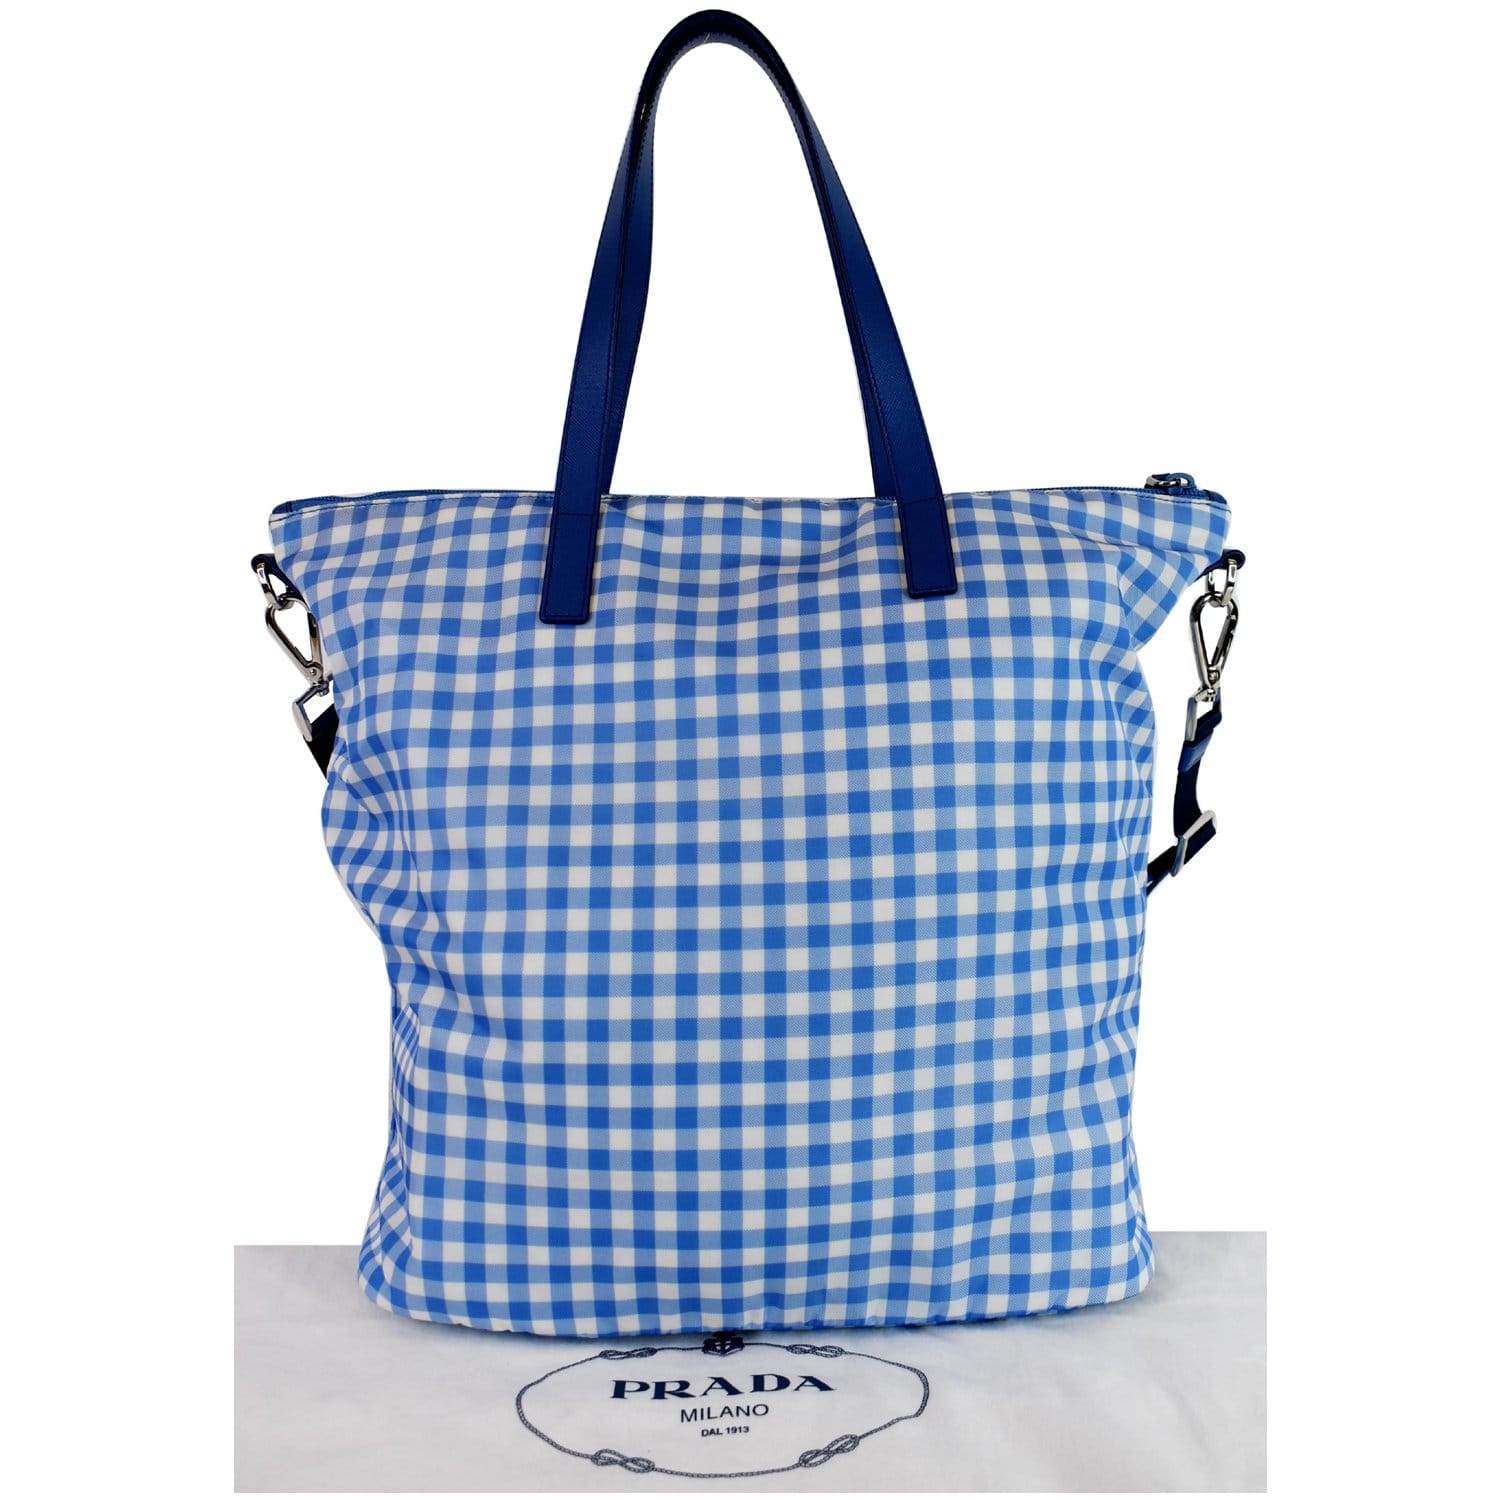 LaBrand.my - P R A D A Nylon Tote Bag 𝑷𝒓𝒊𝒄𝒆: RM 1,xxx 𝑶𝑵𝑳𝒀 Labrand  is an independent resale platform of authentic new and pre-owned designer  products. All